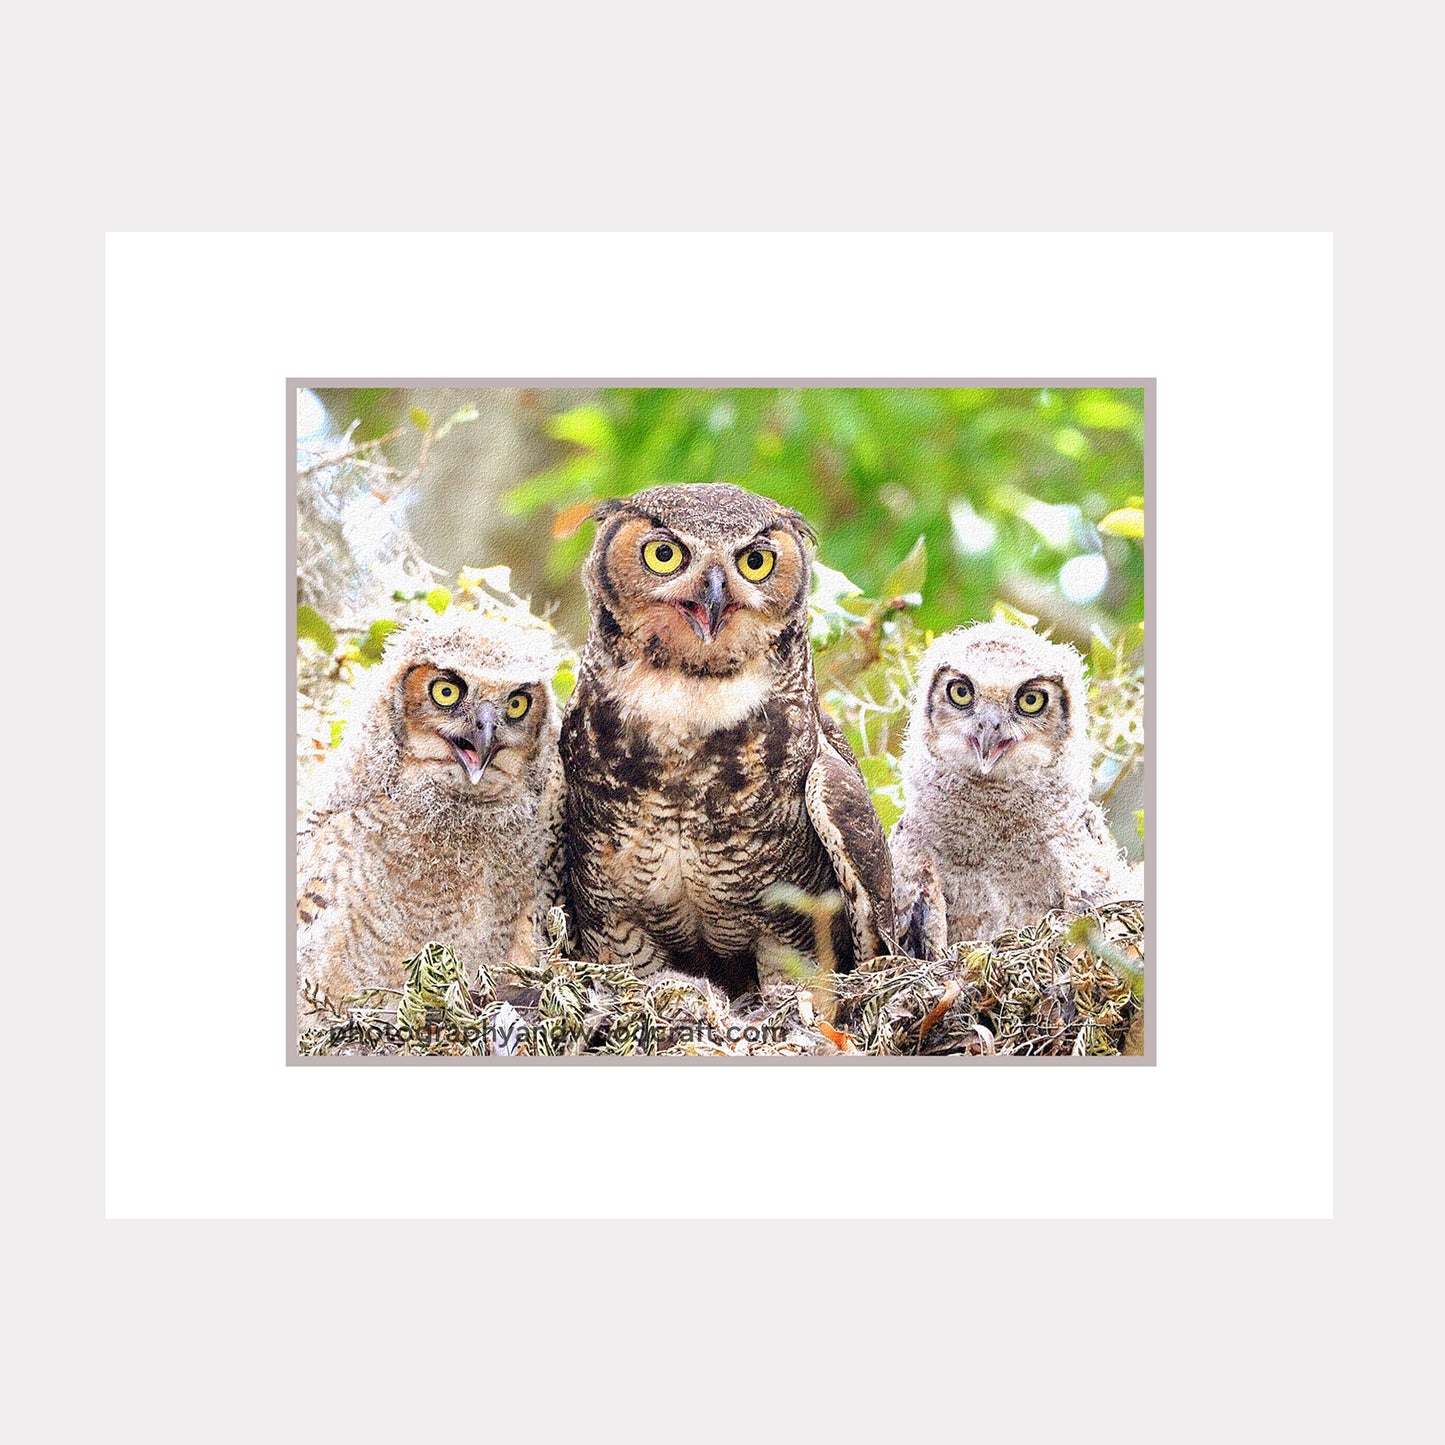 Horned Owl Family (11" x 14") Matted Canvas Print